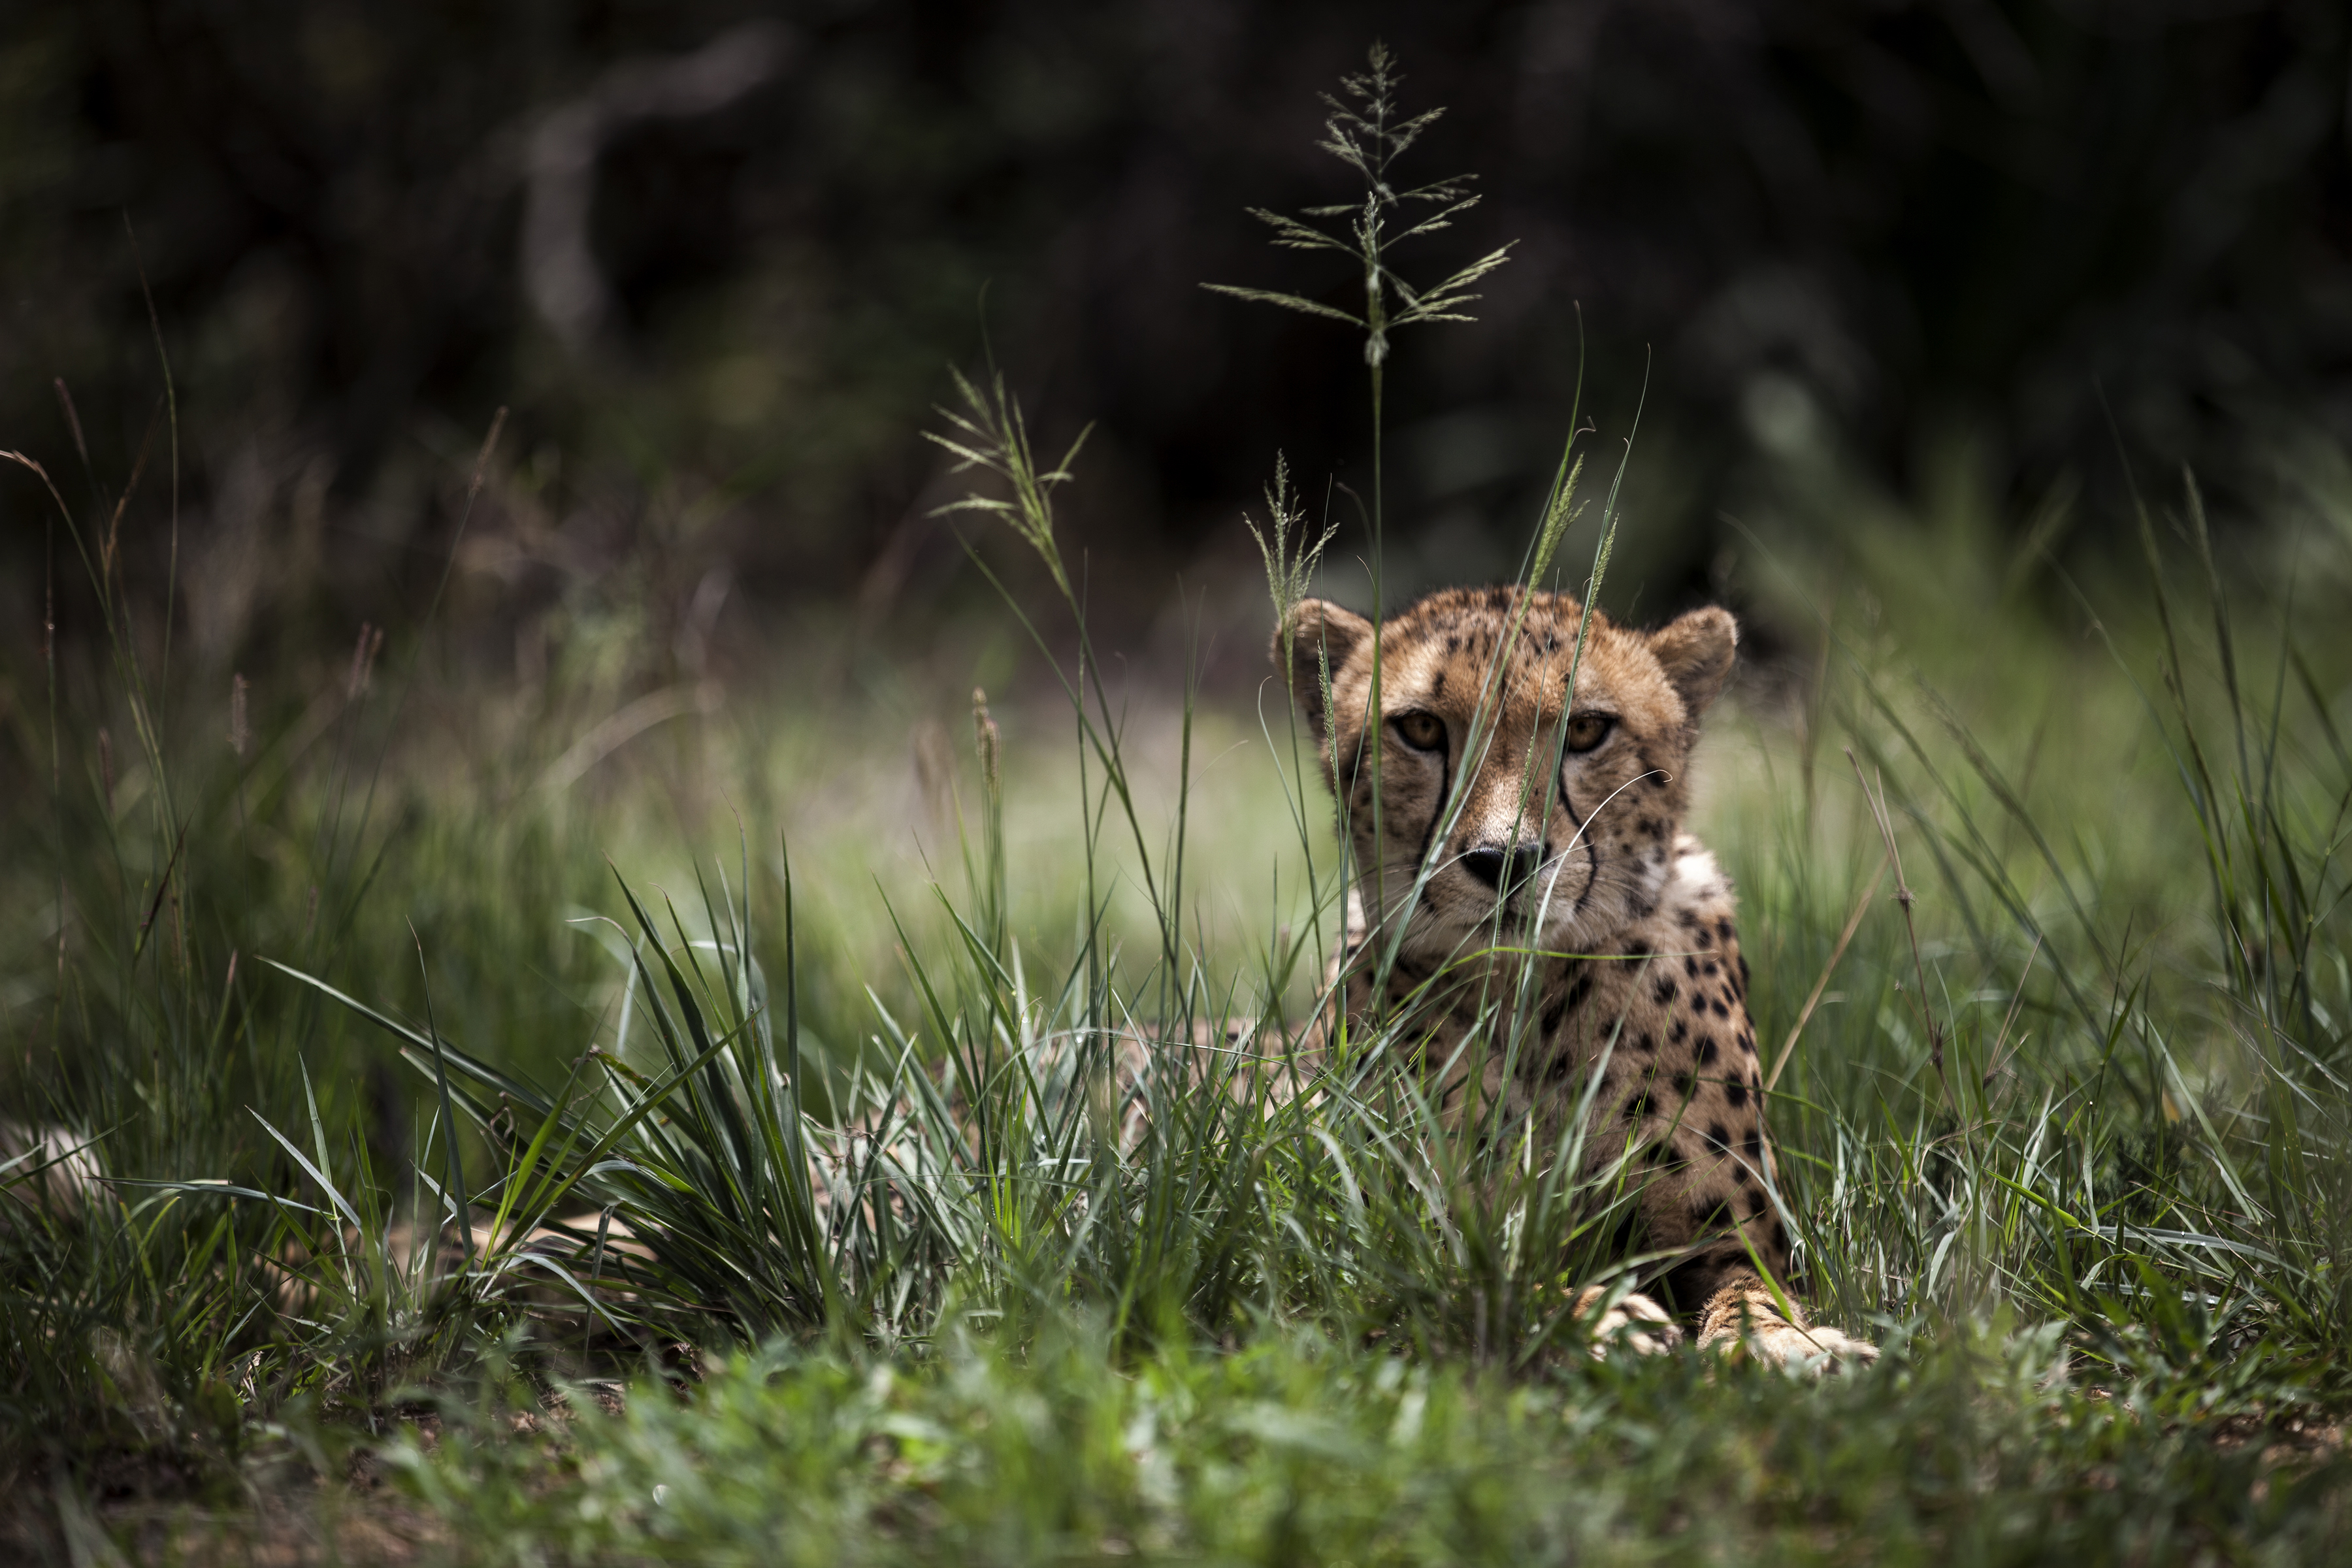 A Juvenile male cheetah is pictured inside a closed camp at the Ann van Dyk Cheetah Centre on December 30, 2016 in Hartbeespoort, South Africa.  Cheetahs are "sprinting" to extinction due to habitat loss and other forms of human impact, according to a new study out this week which called for urgent action to save the world's fastest land animals. / AFP PHOTO / JOHN WESSELS